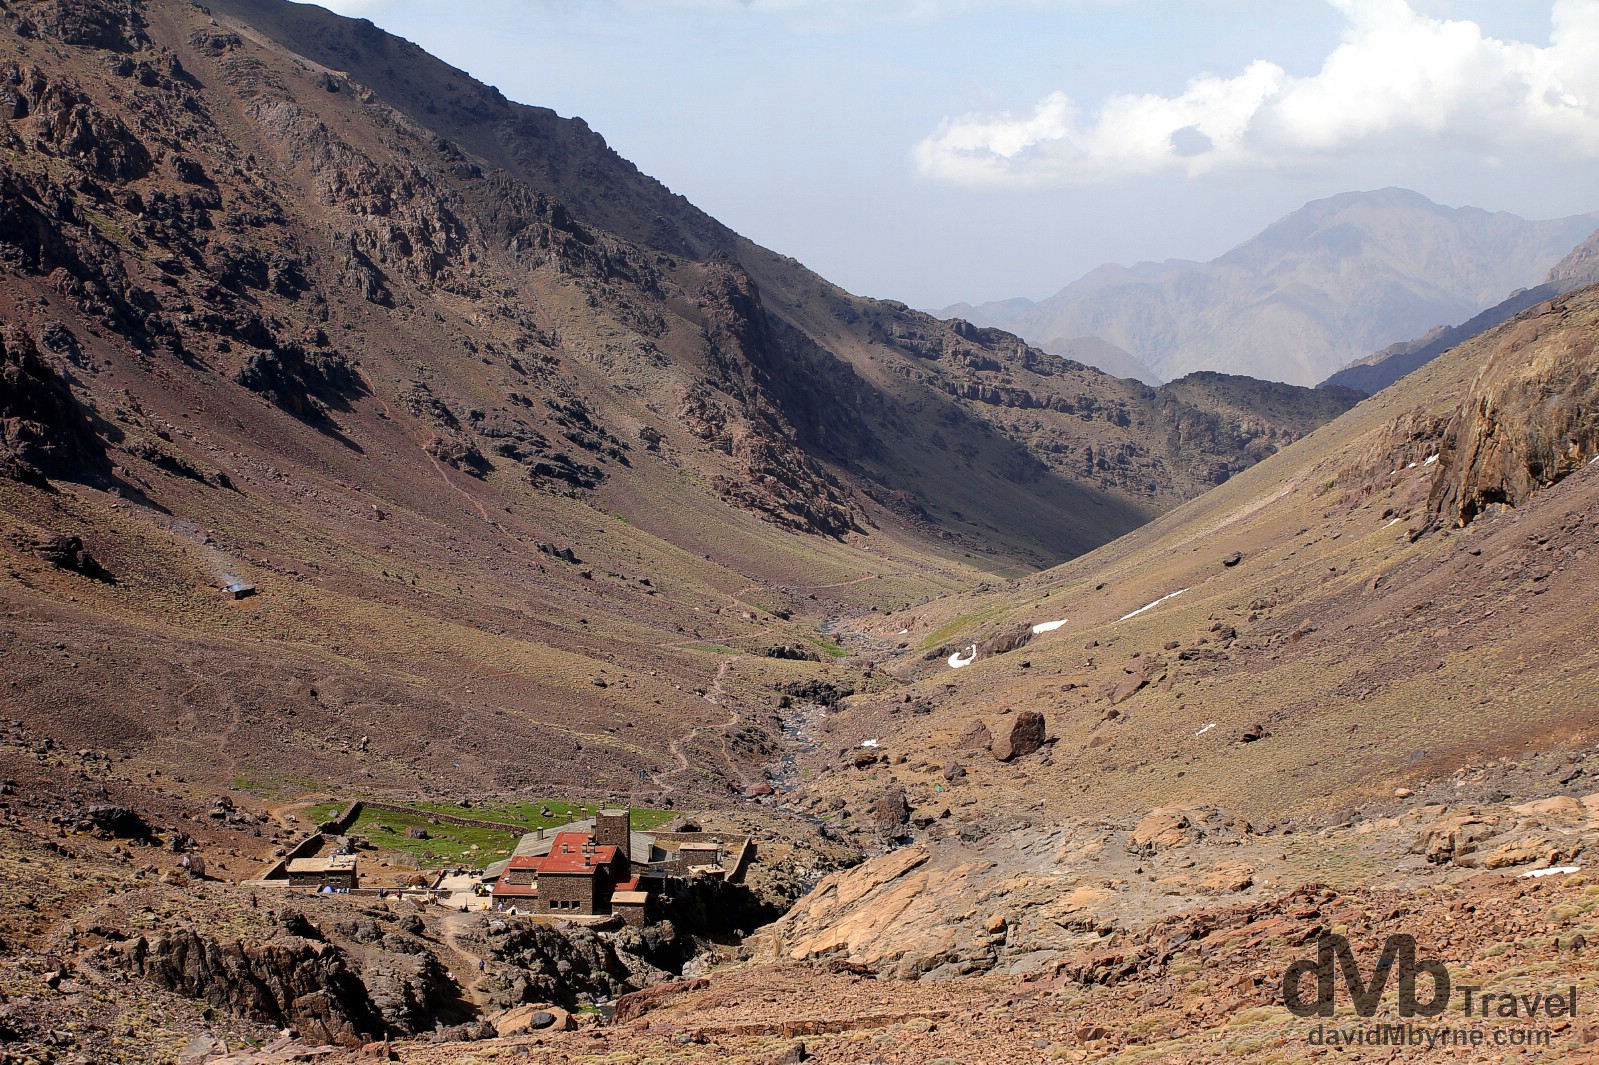 The Toubkal Refuge sitting in the valley leading to the summit of Jebel Toubkal, High Atlas, central Morocco. May 10th, 2014.